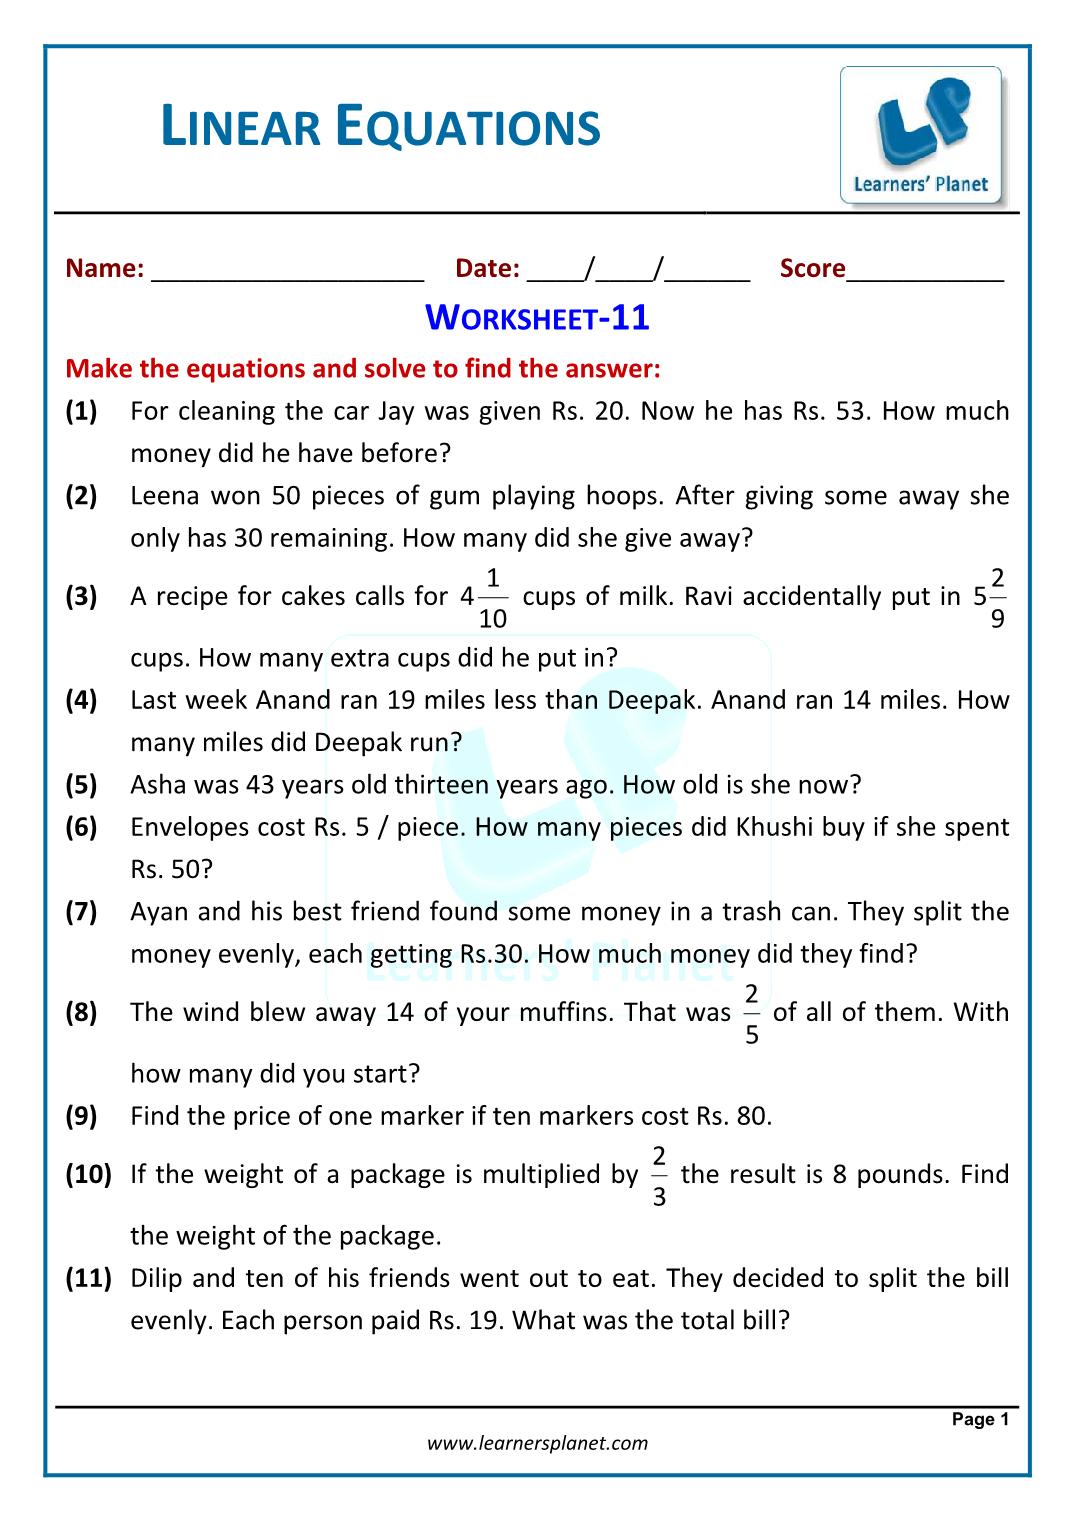 Linear Equations in One Variable Inside Linear Word Problem Worksheet